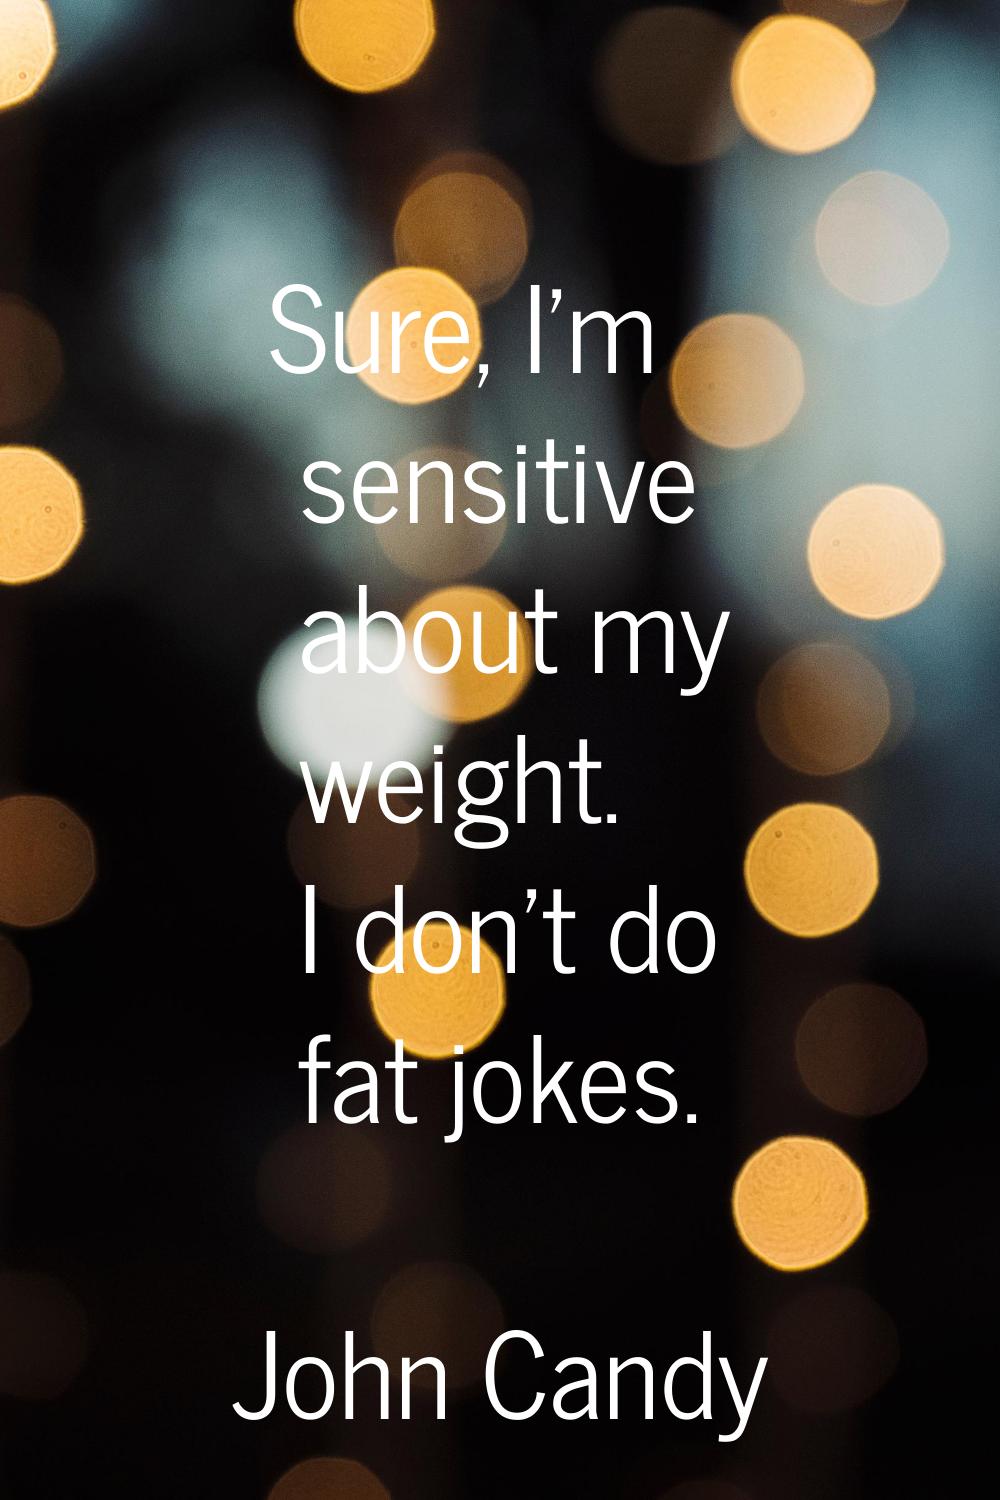 Sure, I'm sensitive about my weight. I don't do fat jokes.